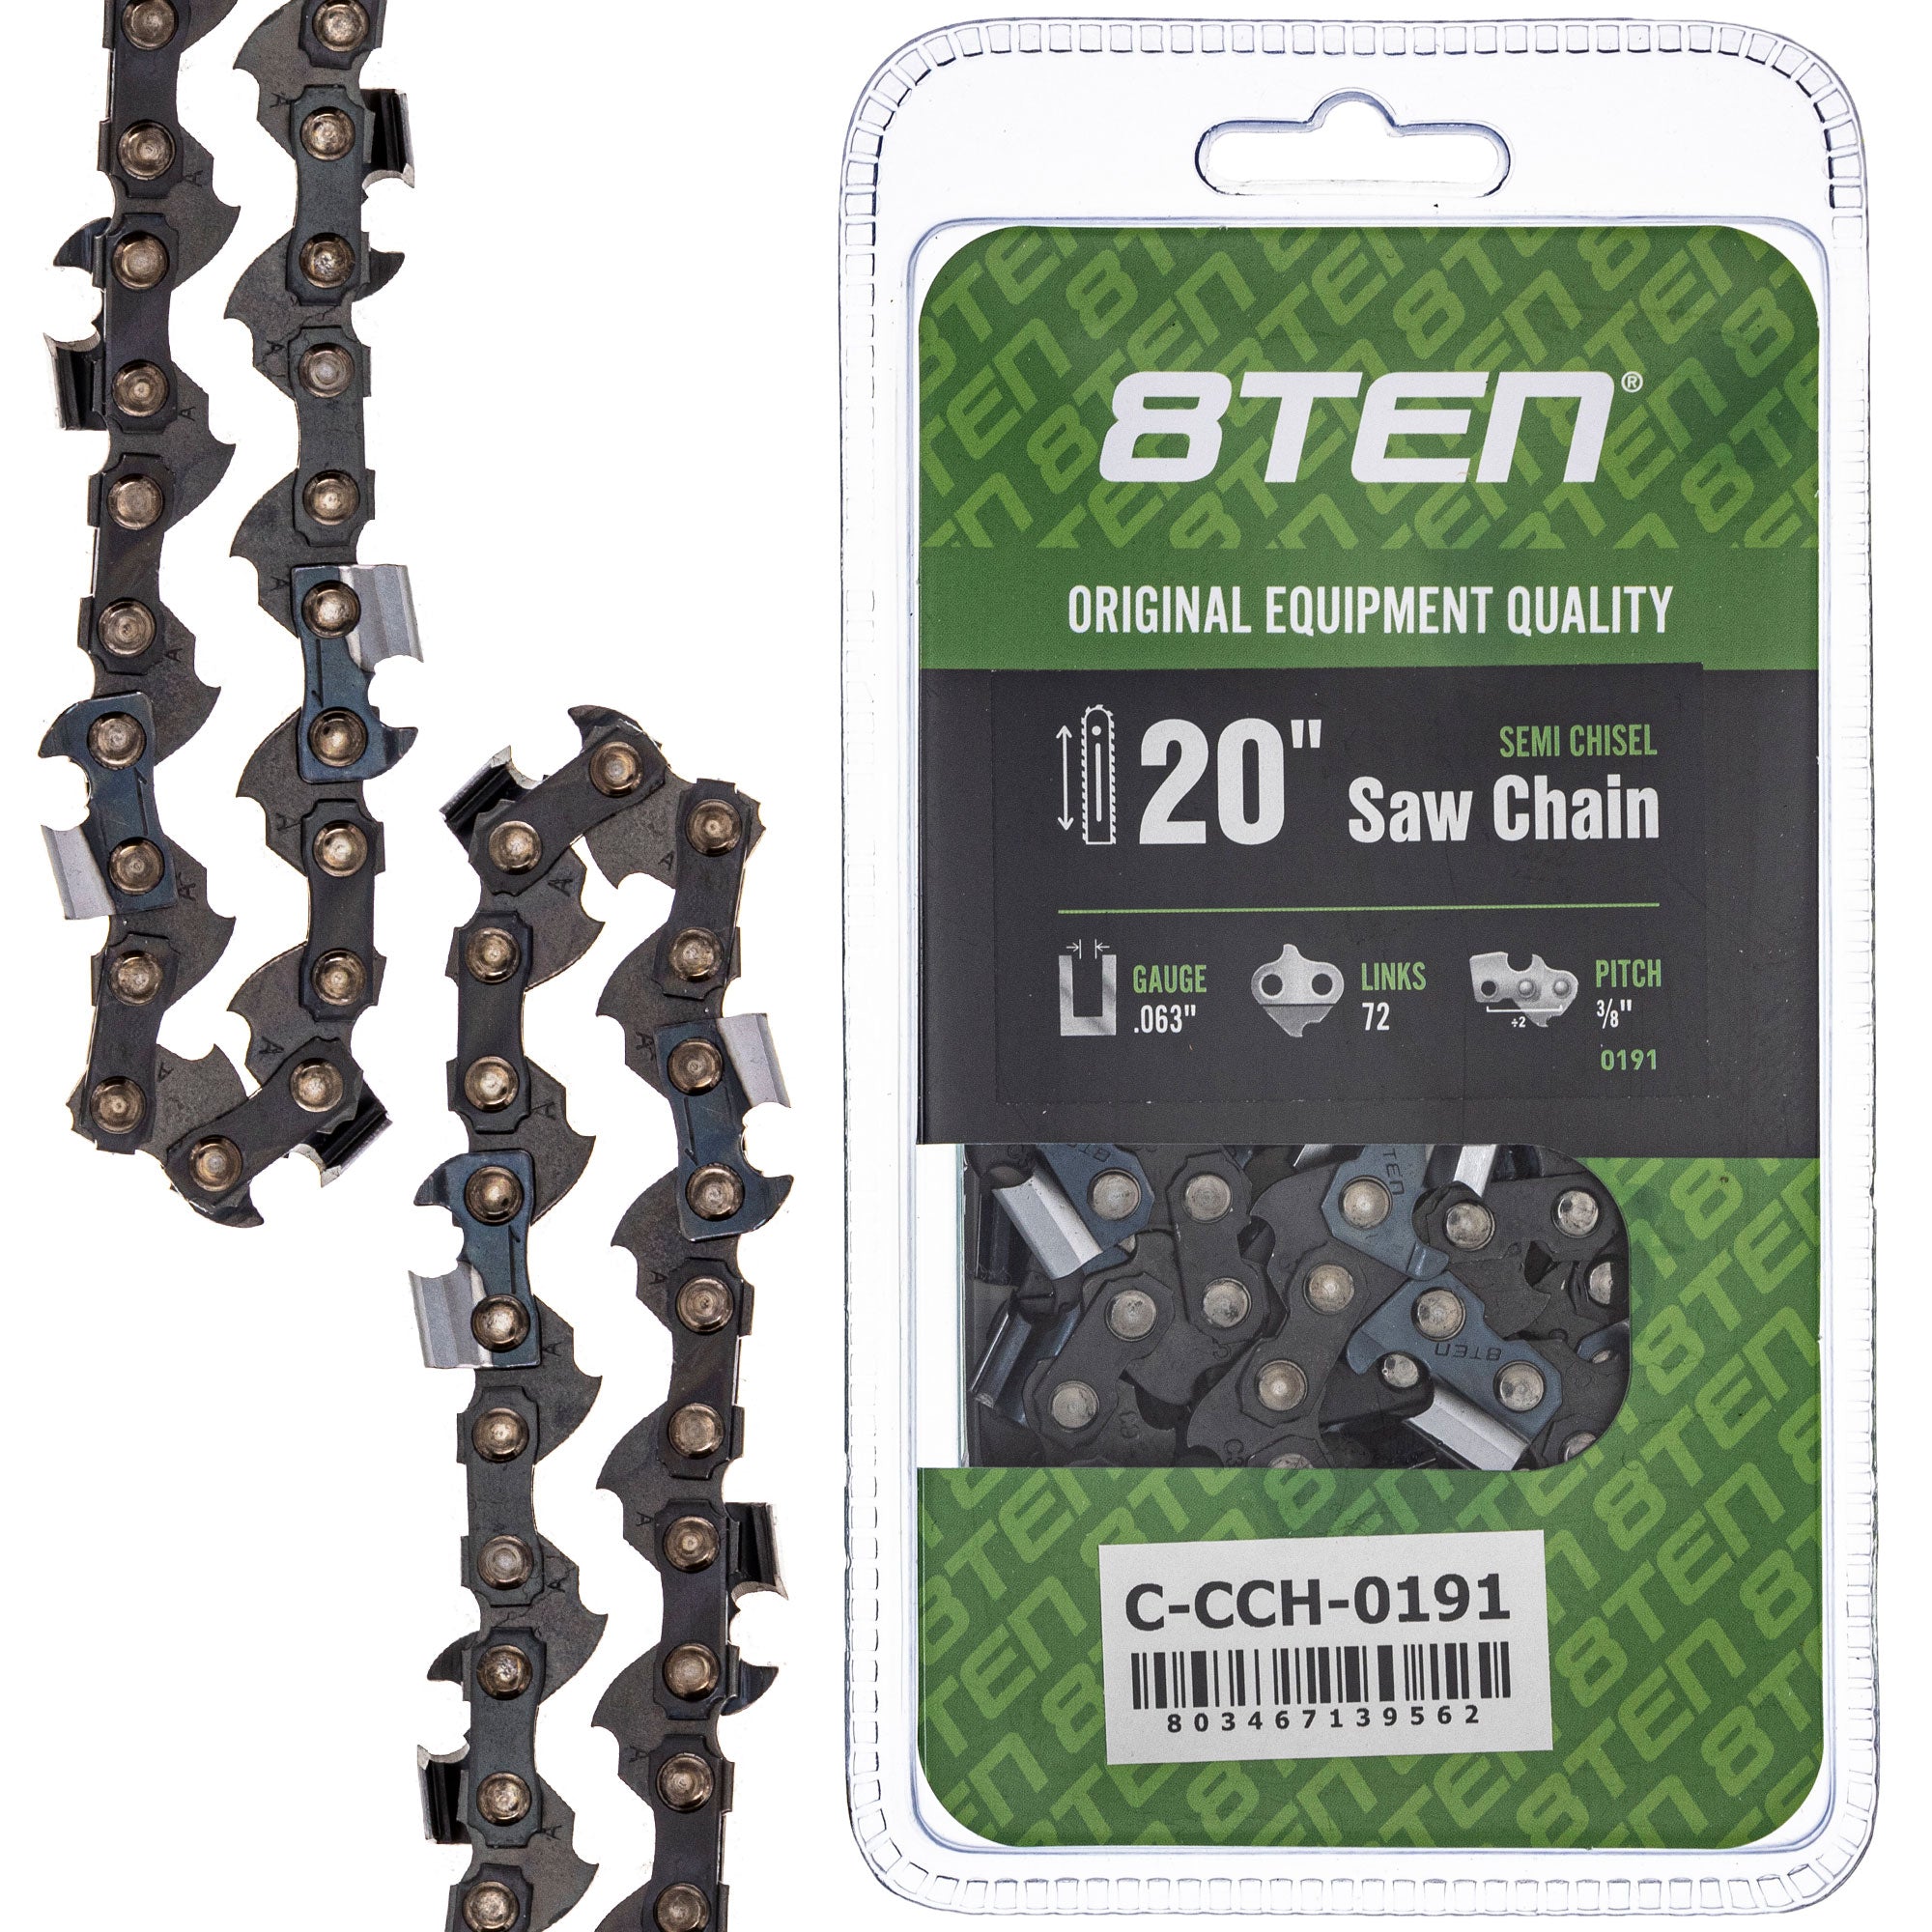 8TEN MK1010453 Guide Bar & Chain for MSE MS E 066